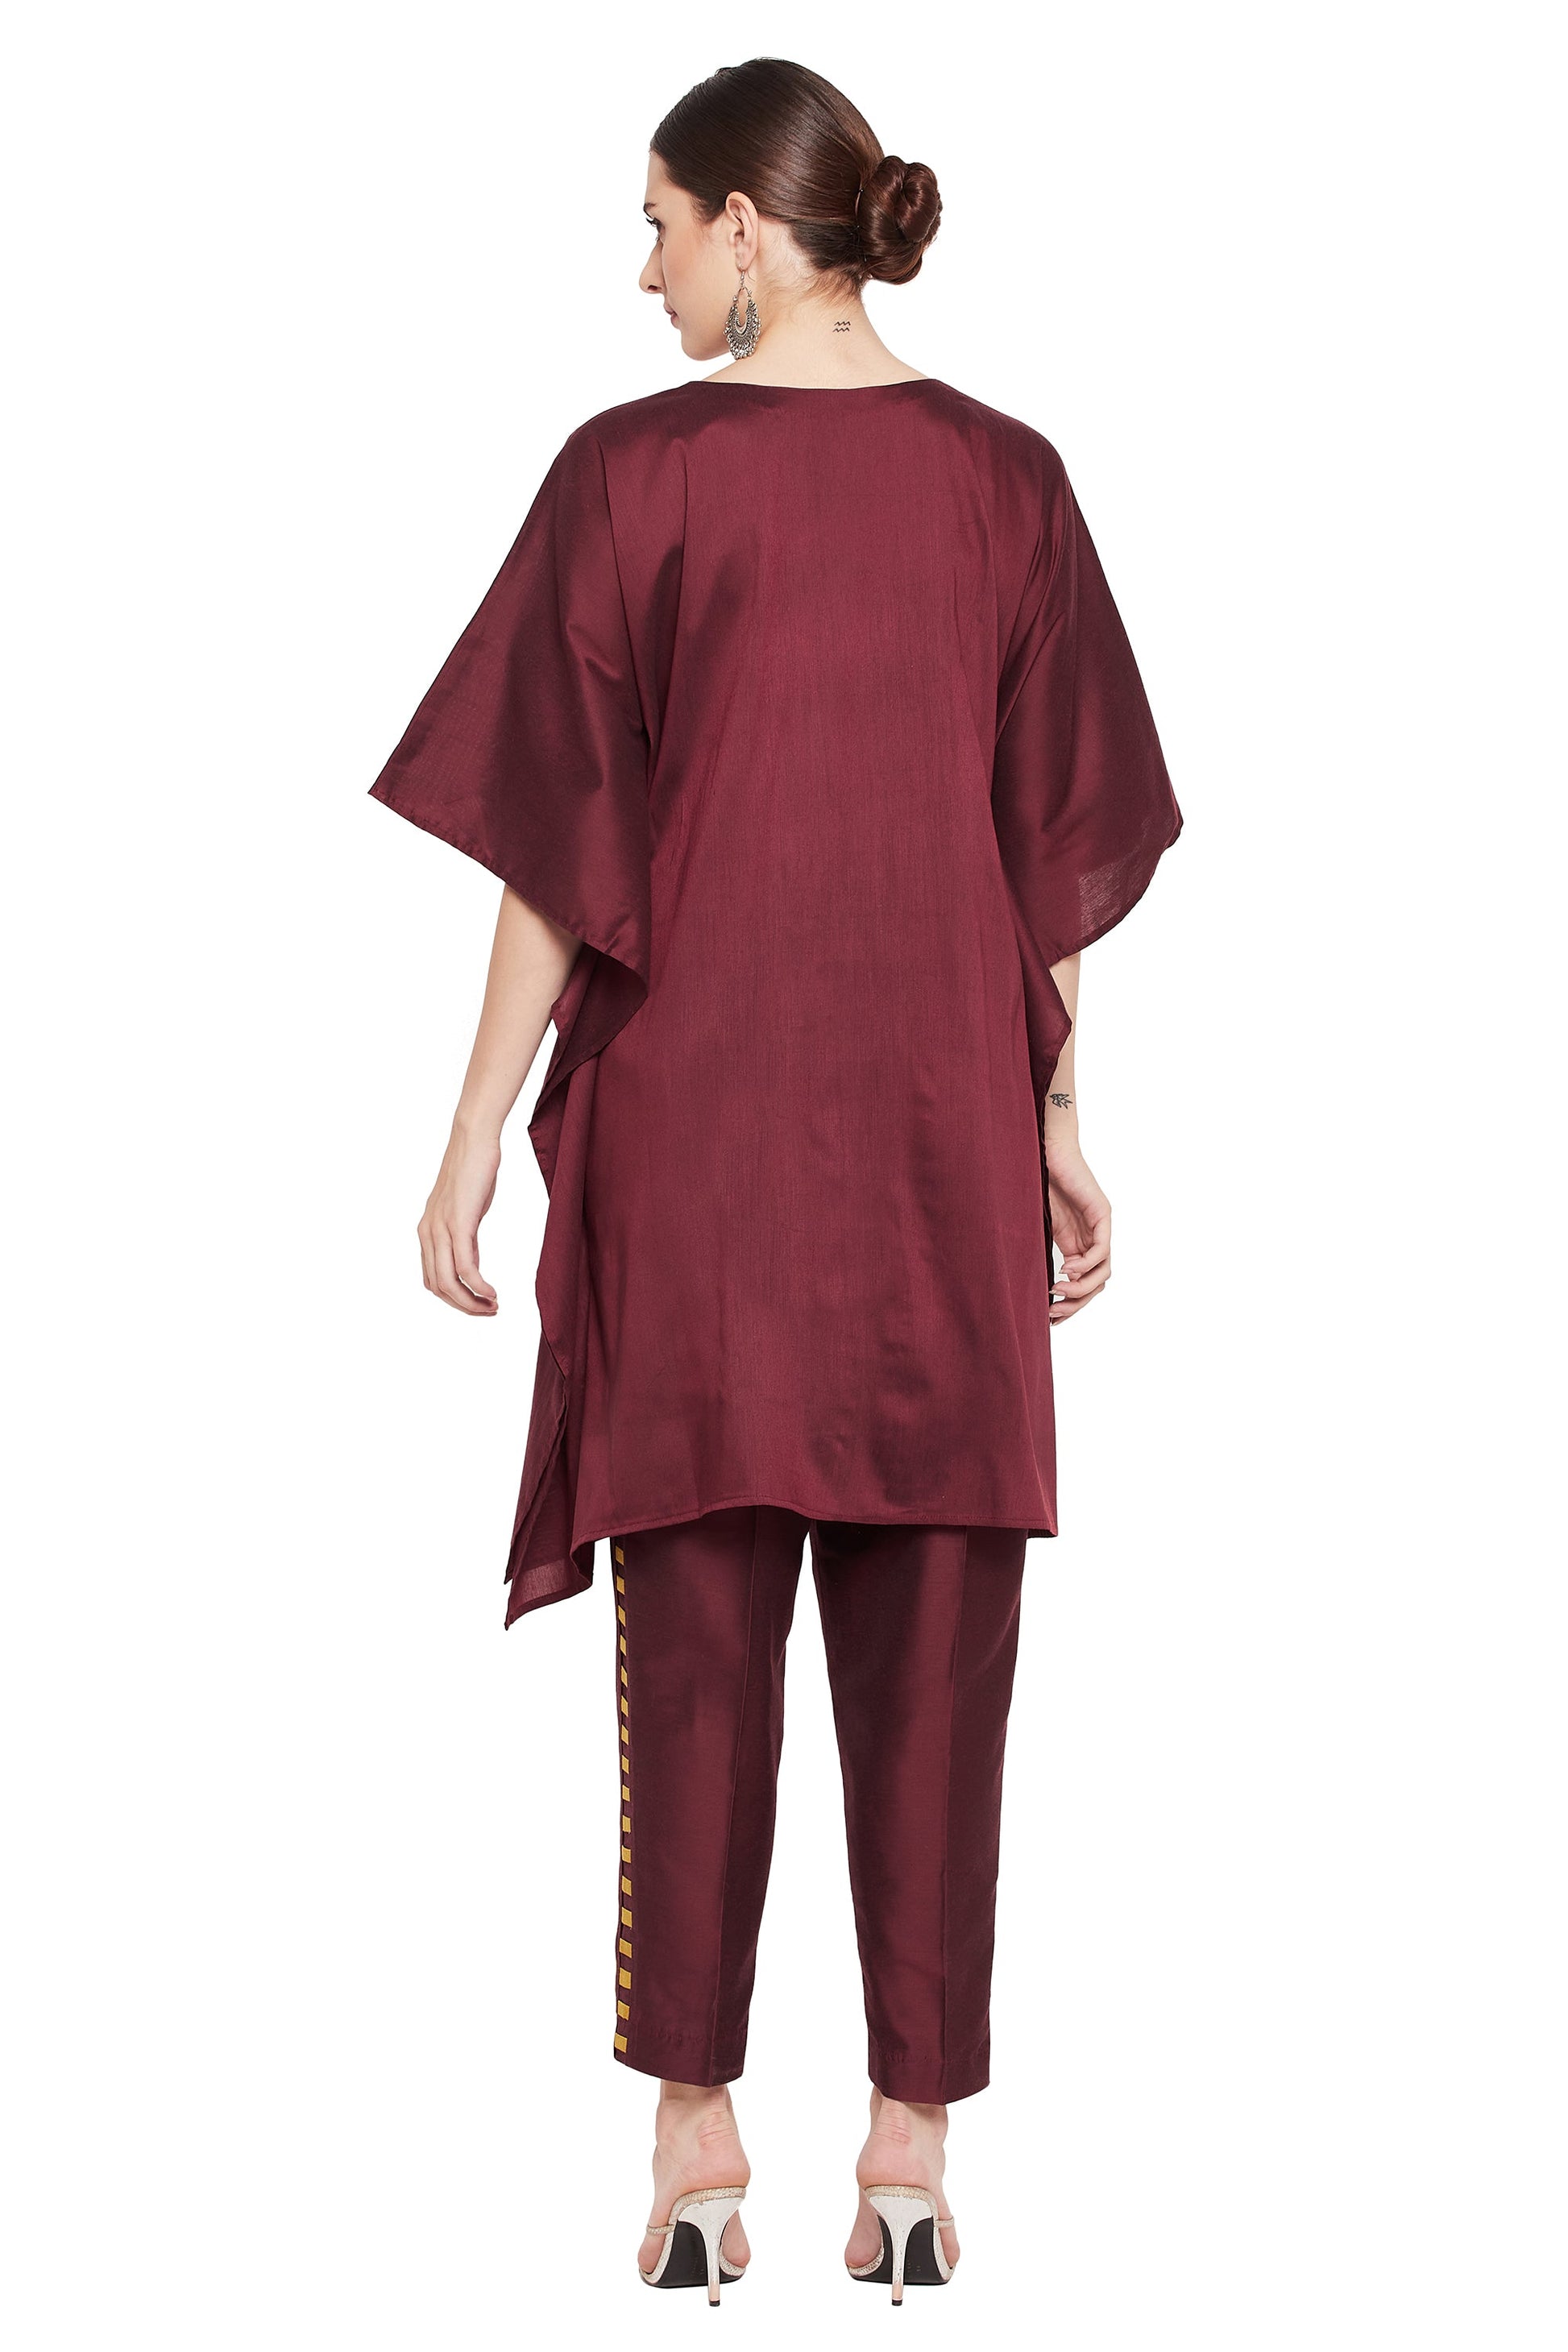 Women's V-Neck Tunic Top with Pants 3/4 Sleeve Wine